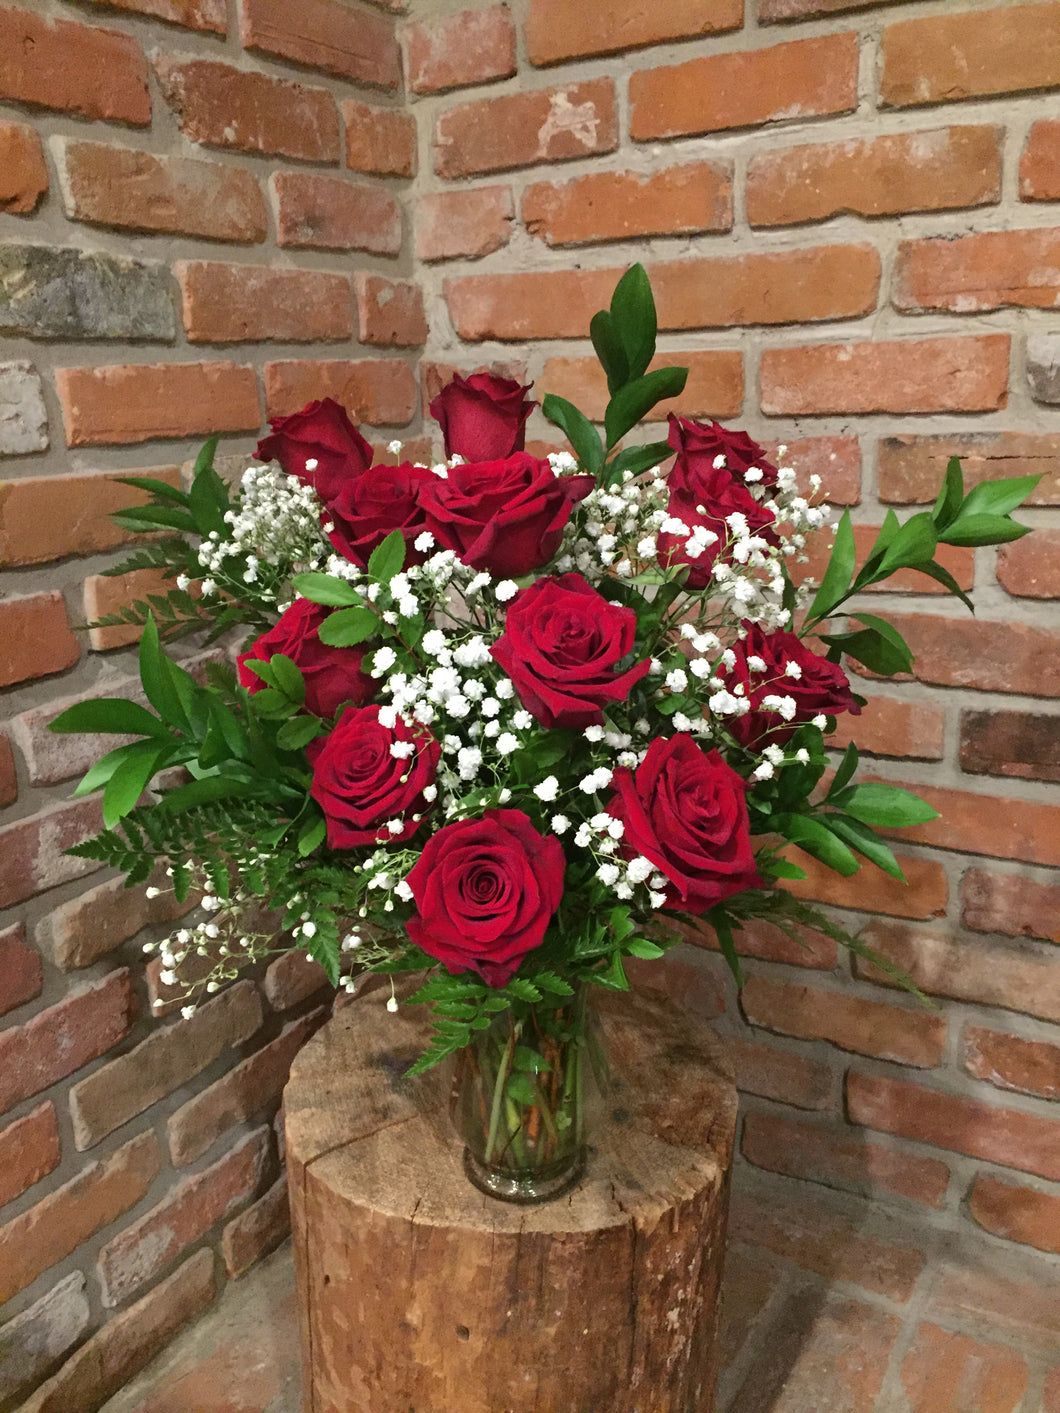 Valentine's Red Rose Vase with Babies Breath